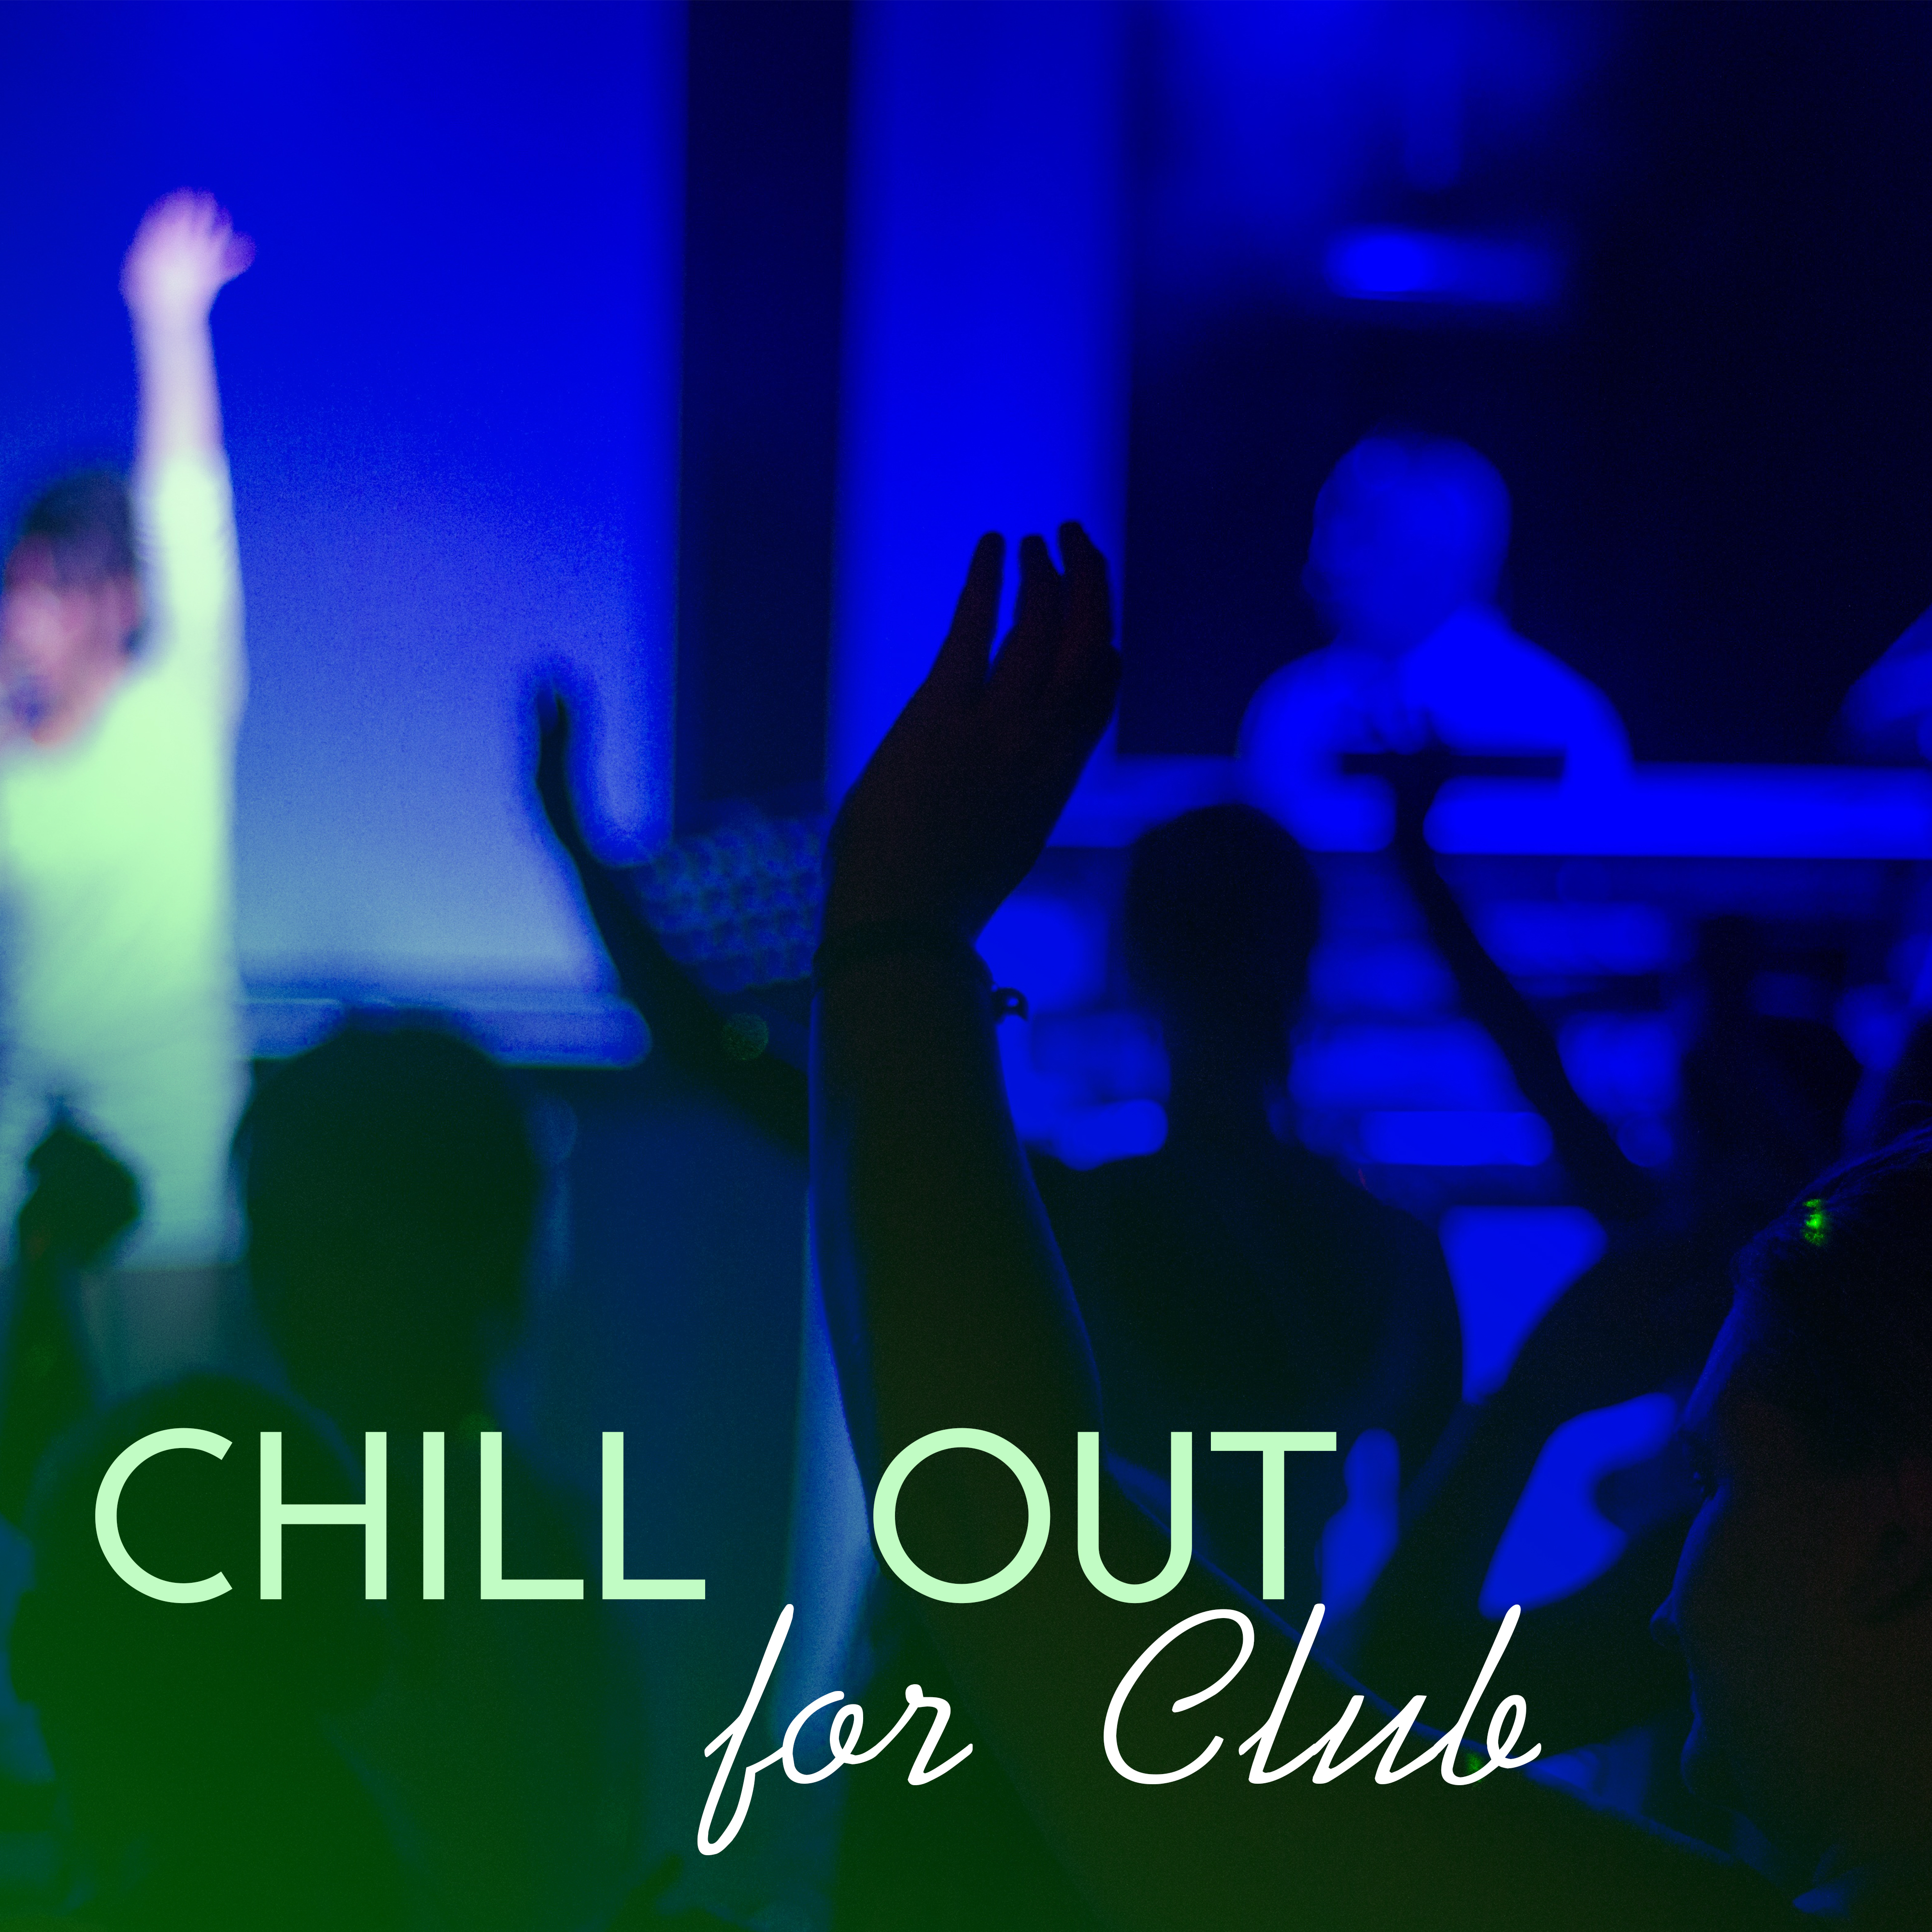 Chill Out for Club – Best Party Chill Out, Music to Have Fun, Drinks & Cocktails, Fun All Night, **** Dance